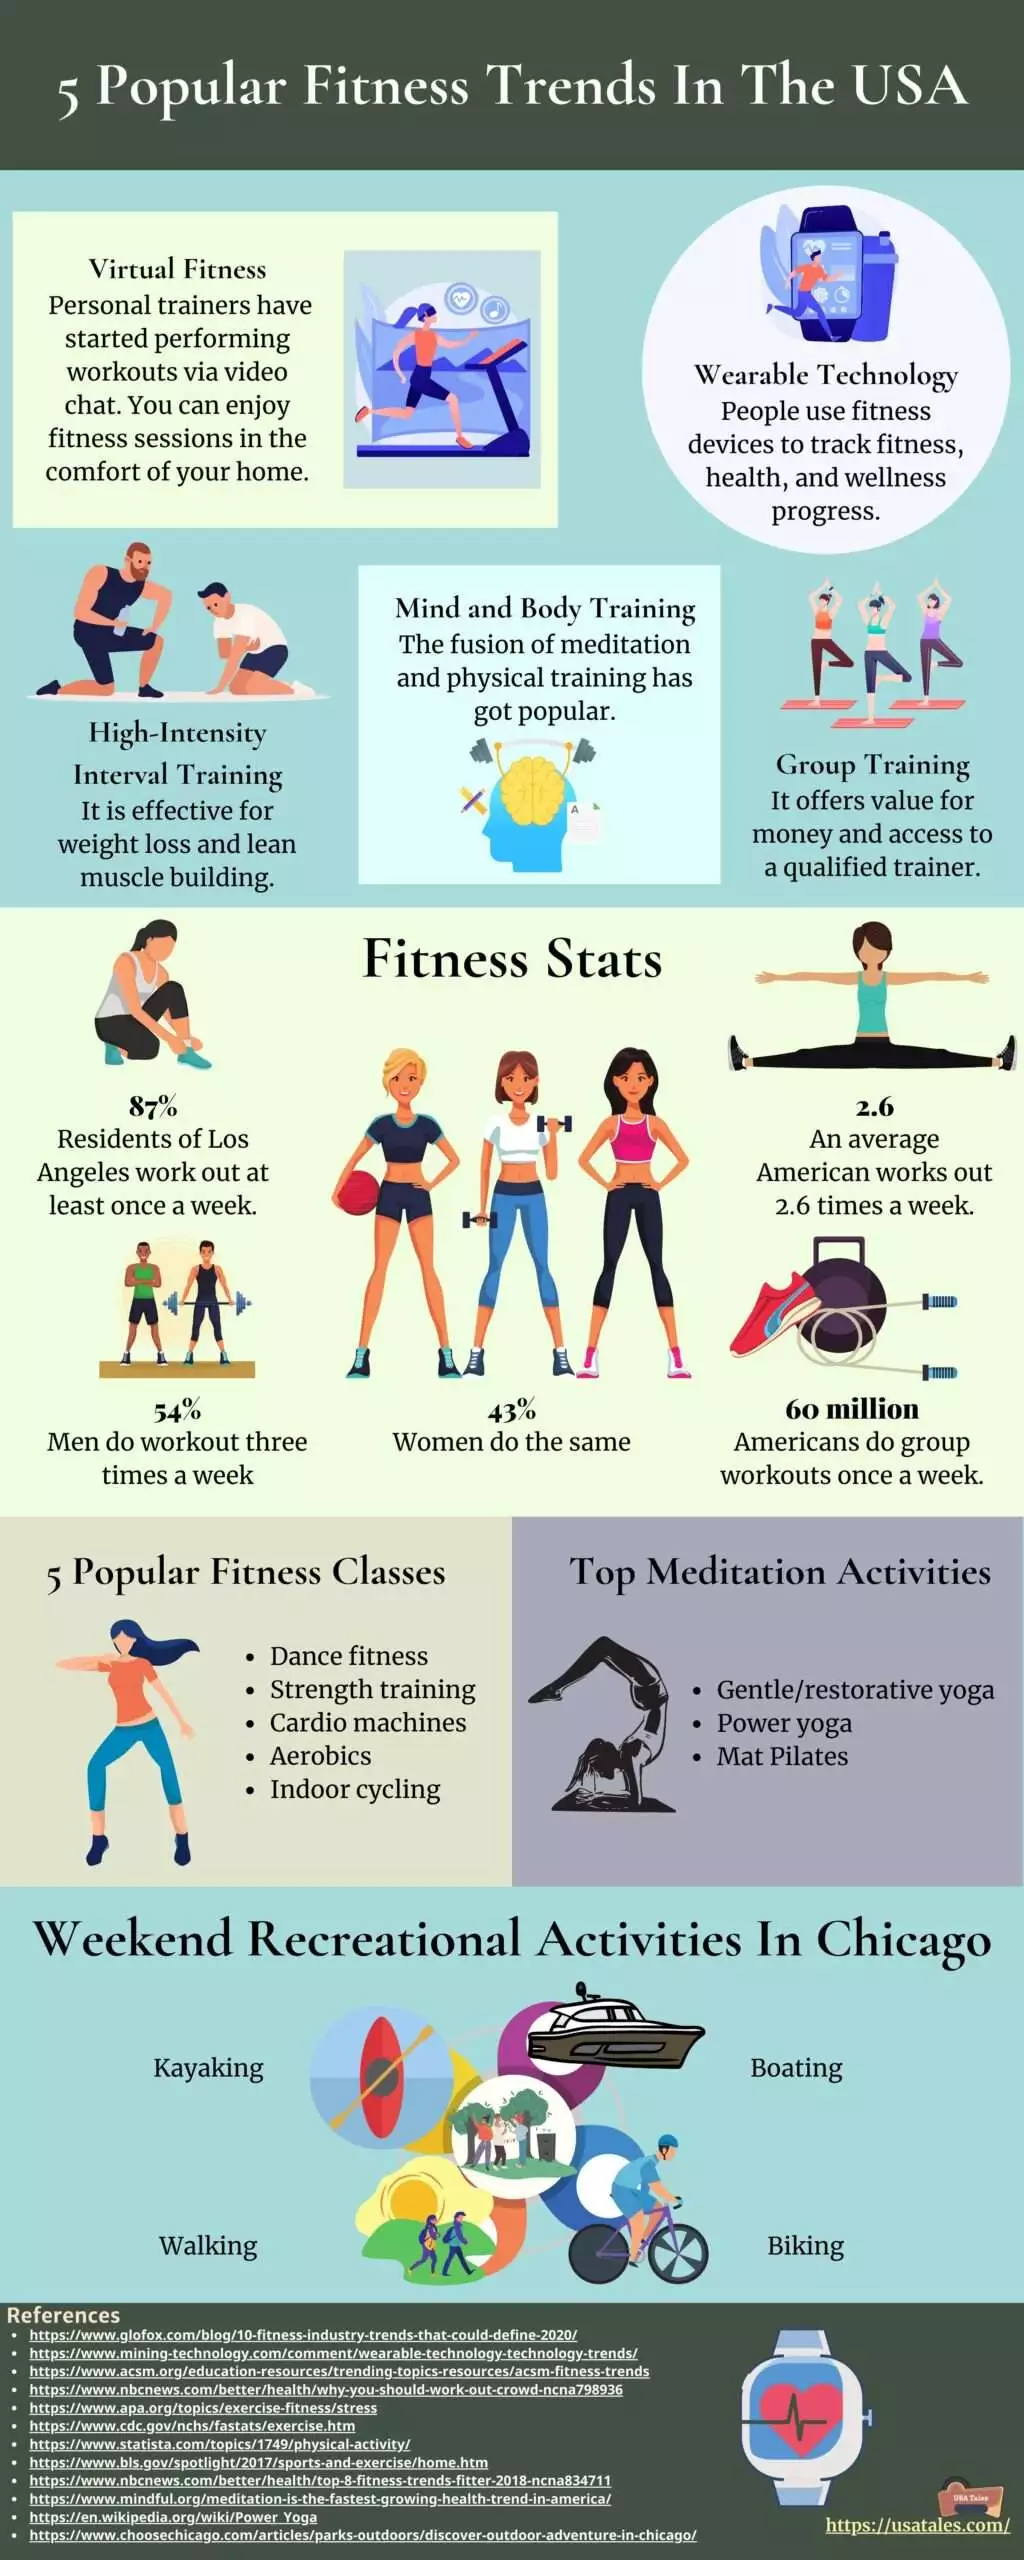 5 Popular Fitness Trends In The USA